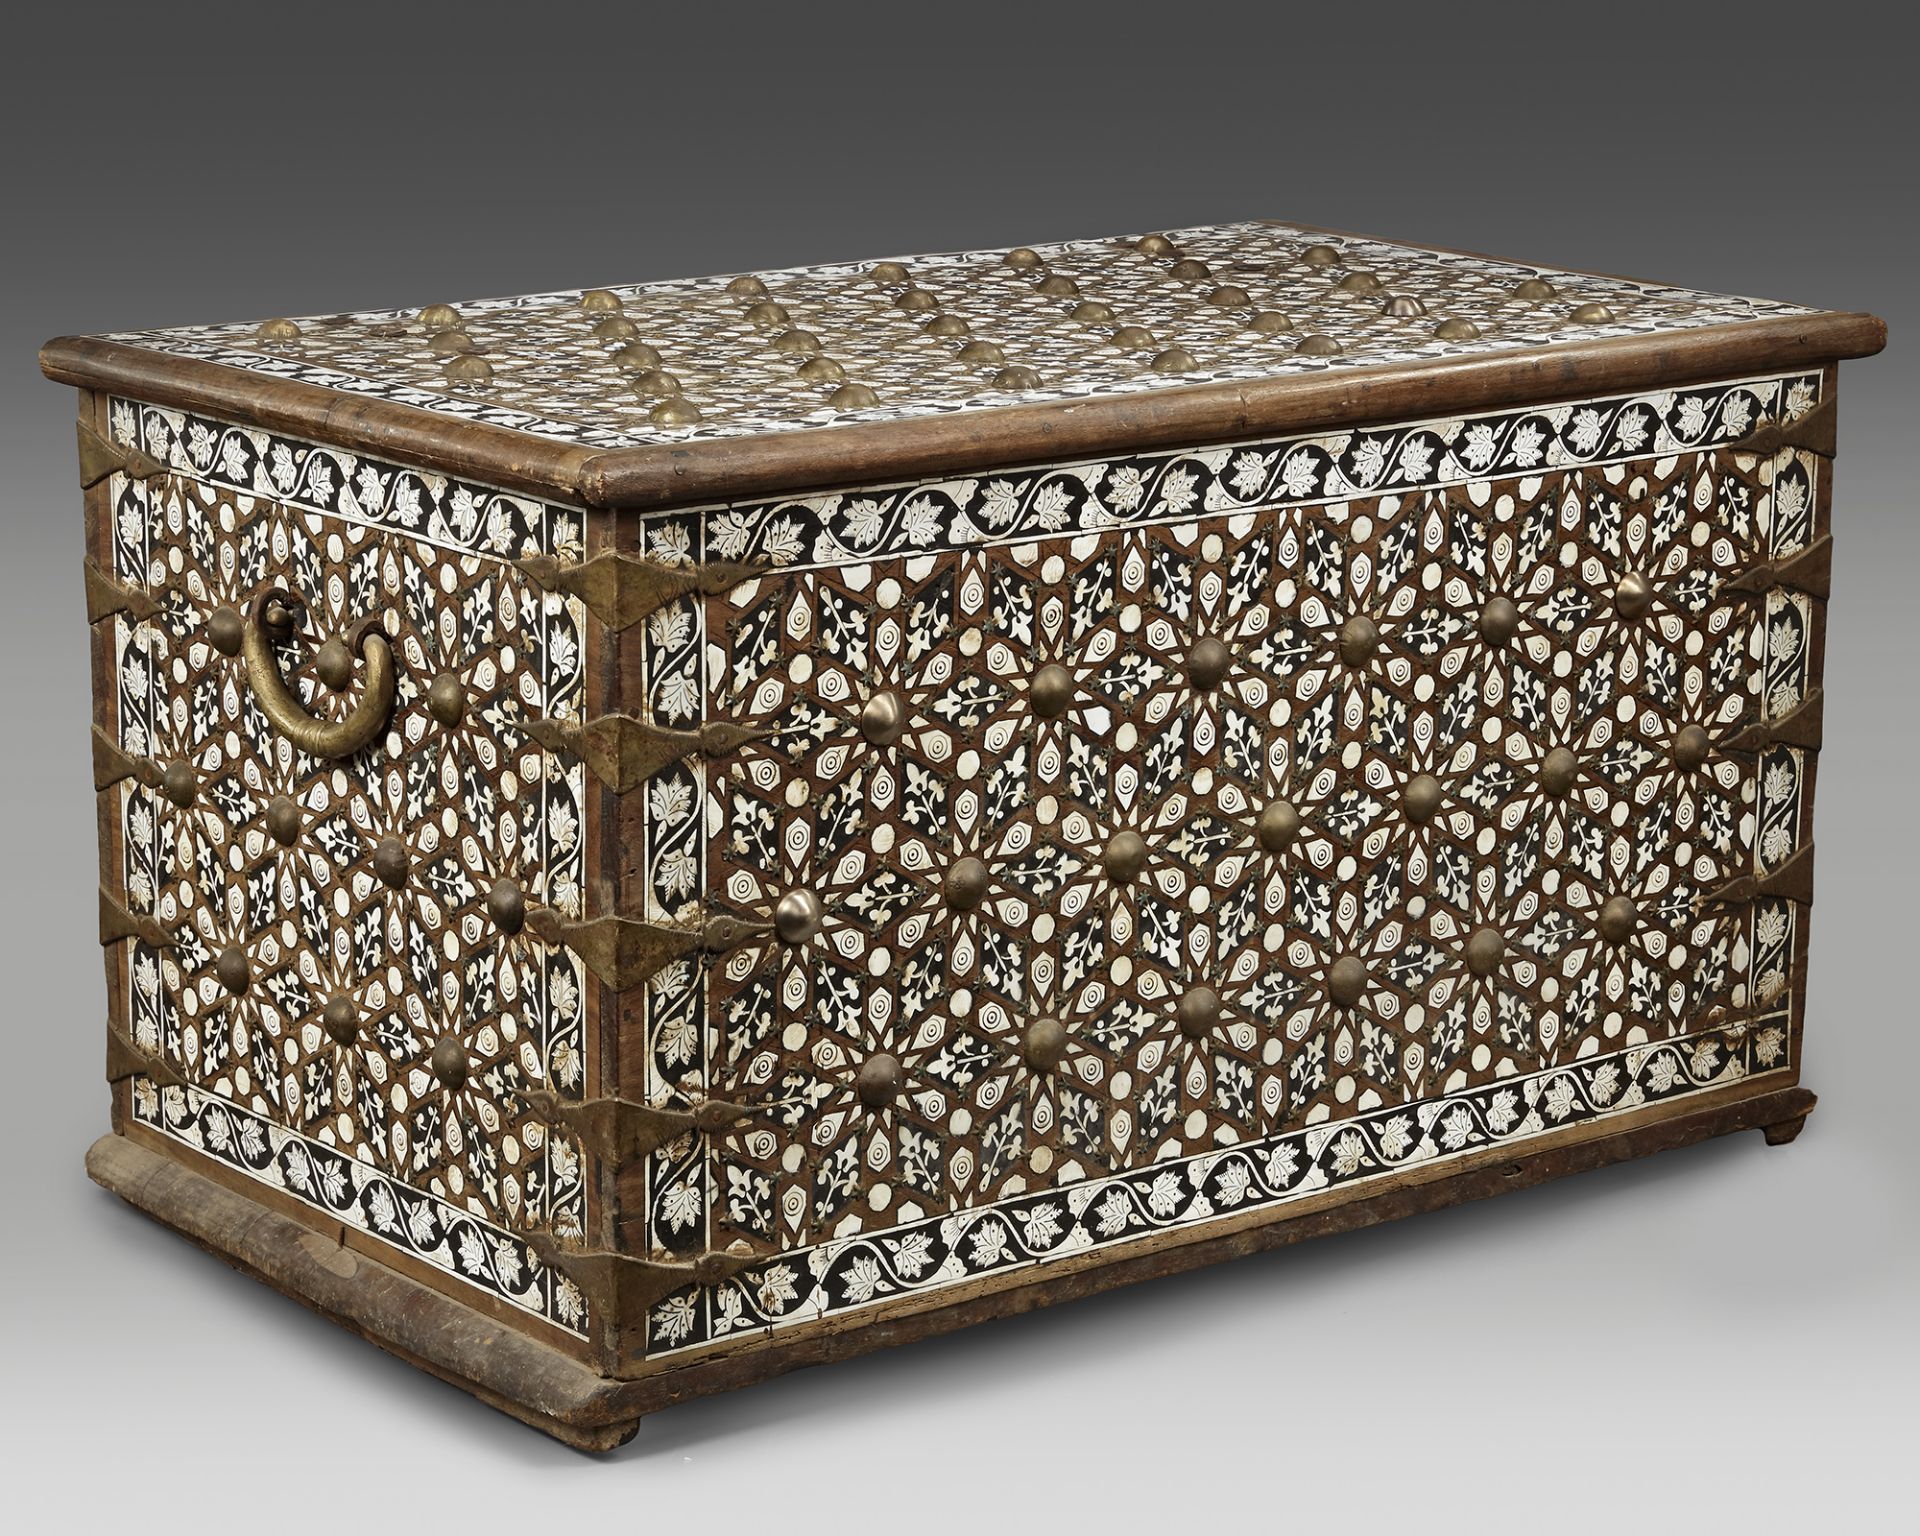 A LARGE OTTOMAN BONE INLAID WOODEN CHEST, SYRIA, LATE 19TH-EARLY 20TH CENTURY - Bild 4 aus 5